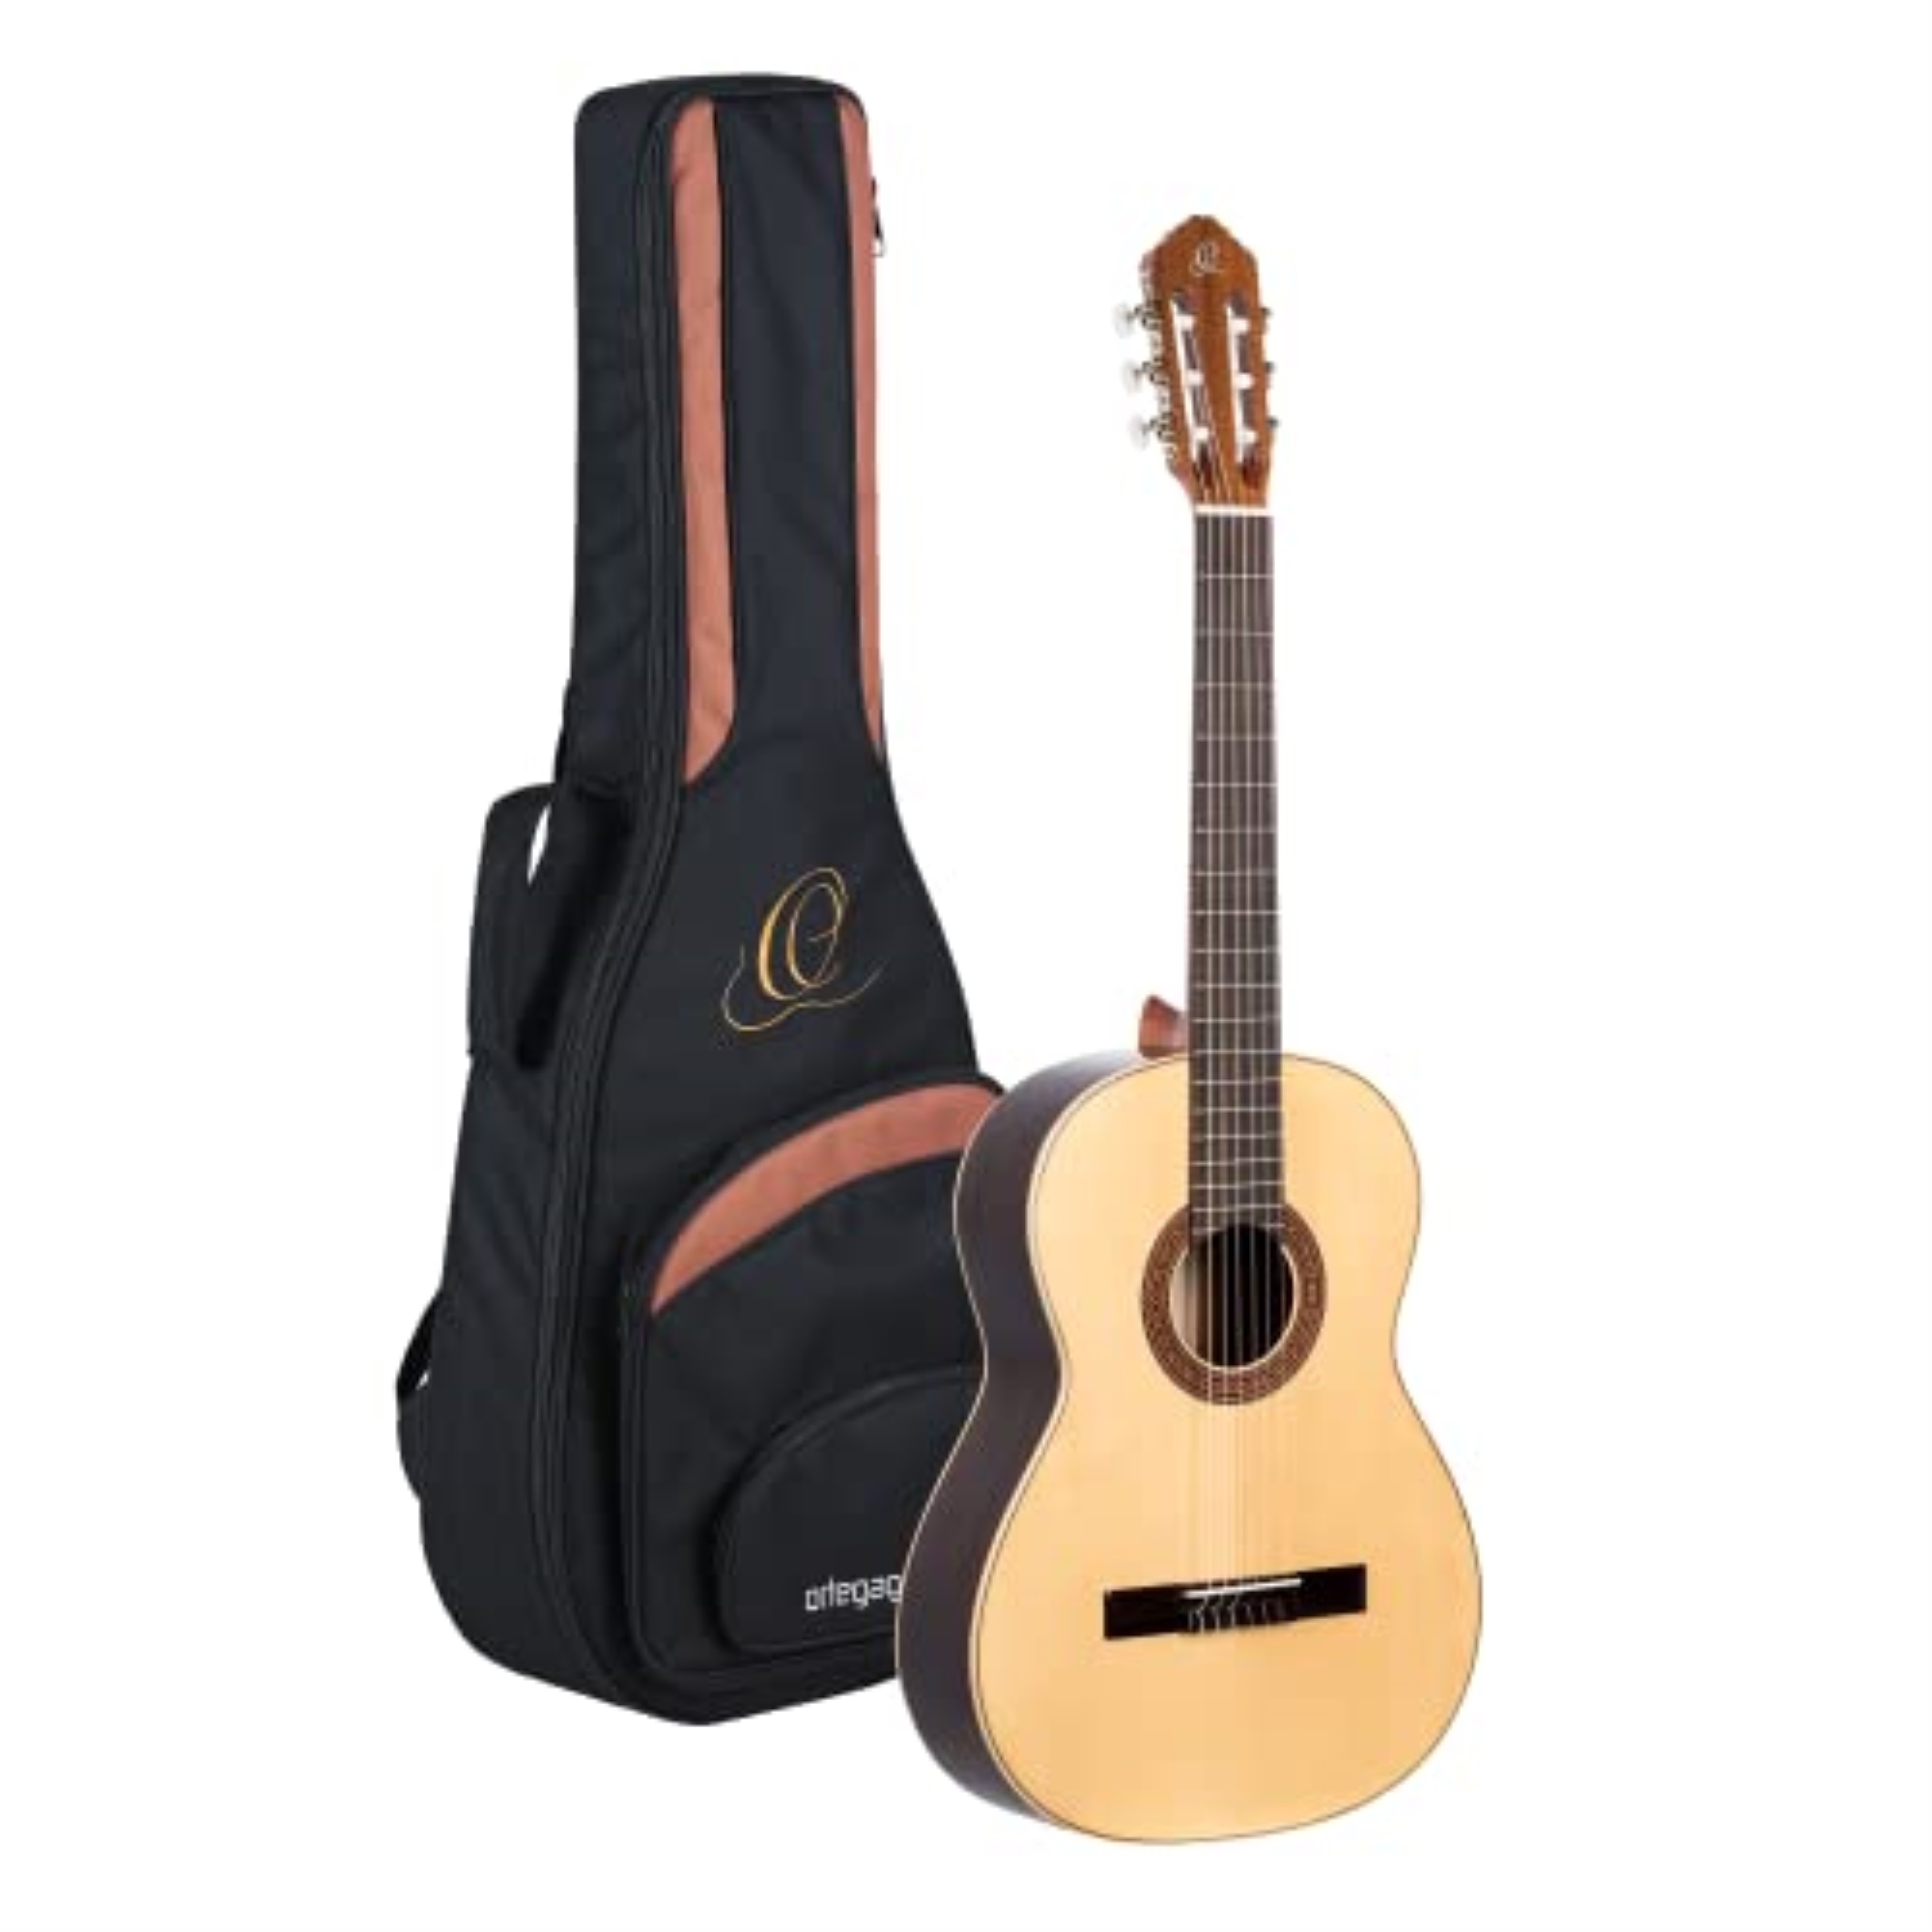 Ortega Guitars Traditional Series - Made in Spain Solid Top Classical Guitar with Bag